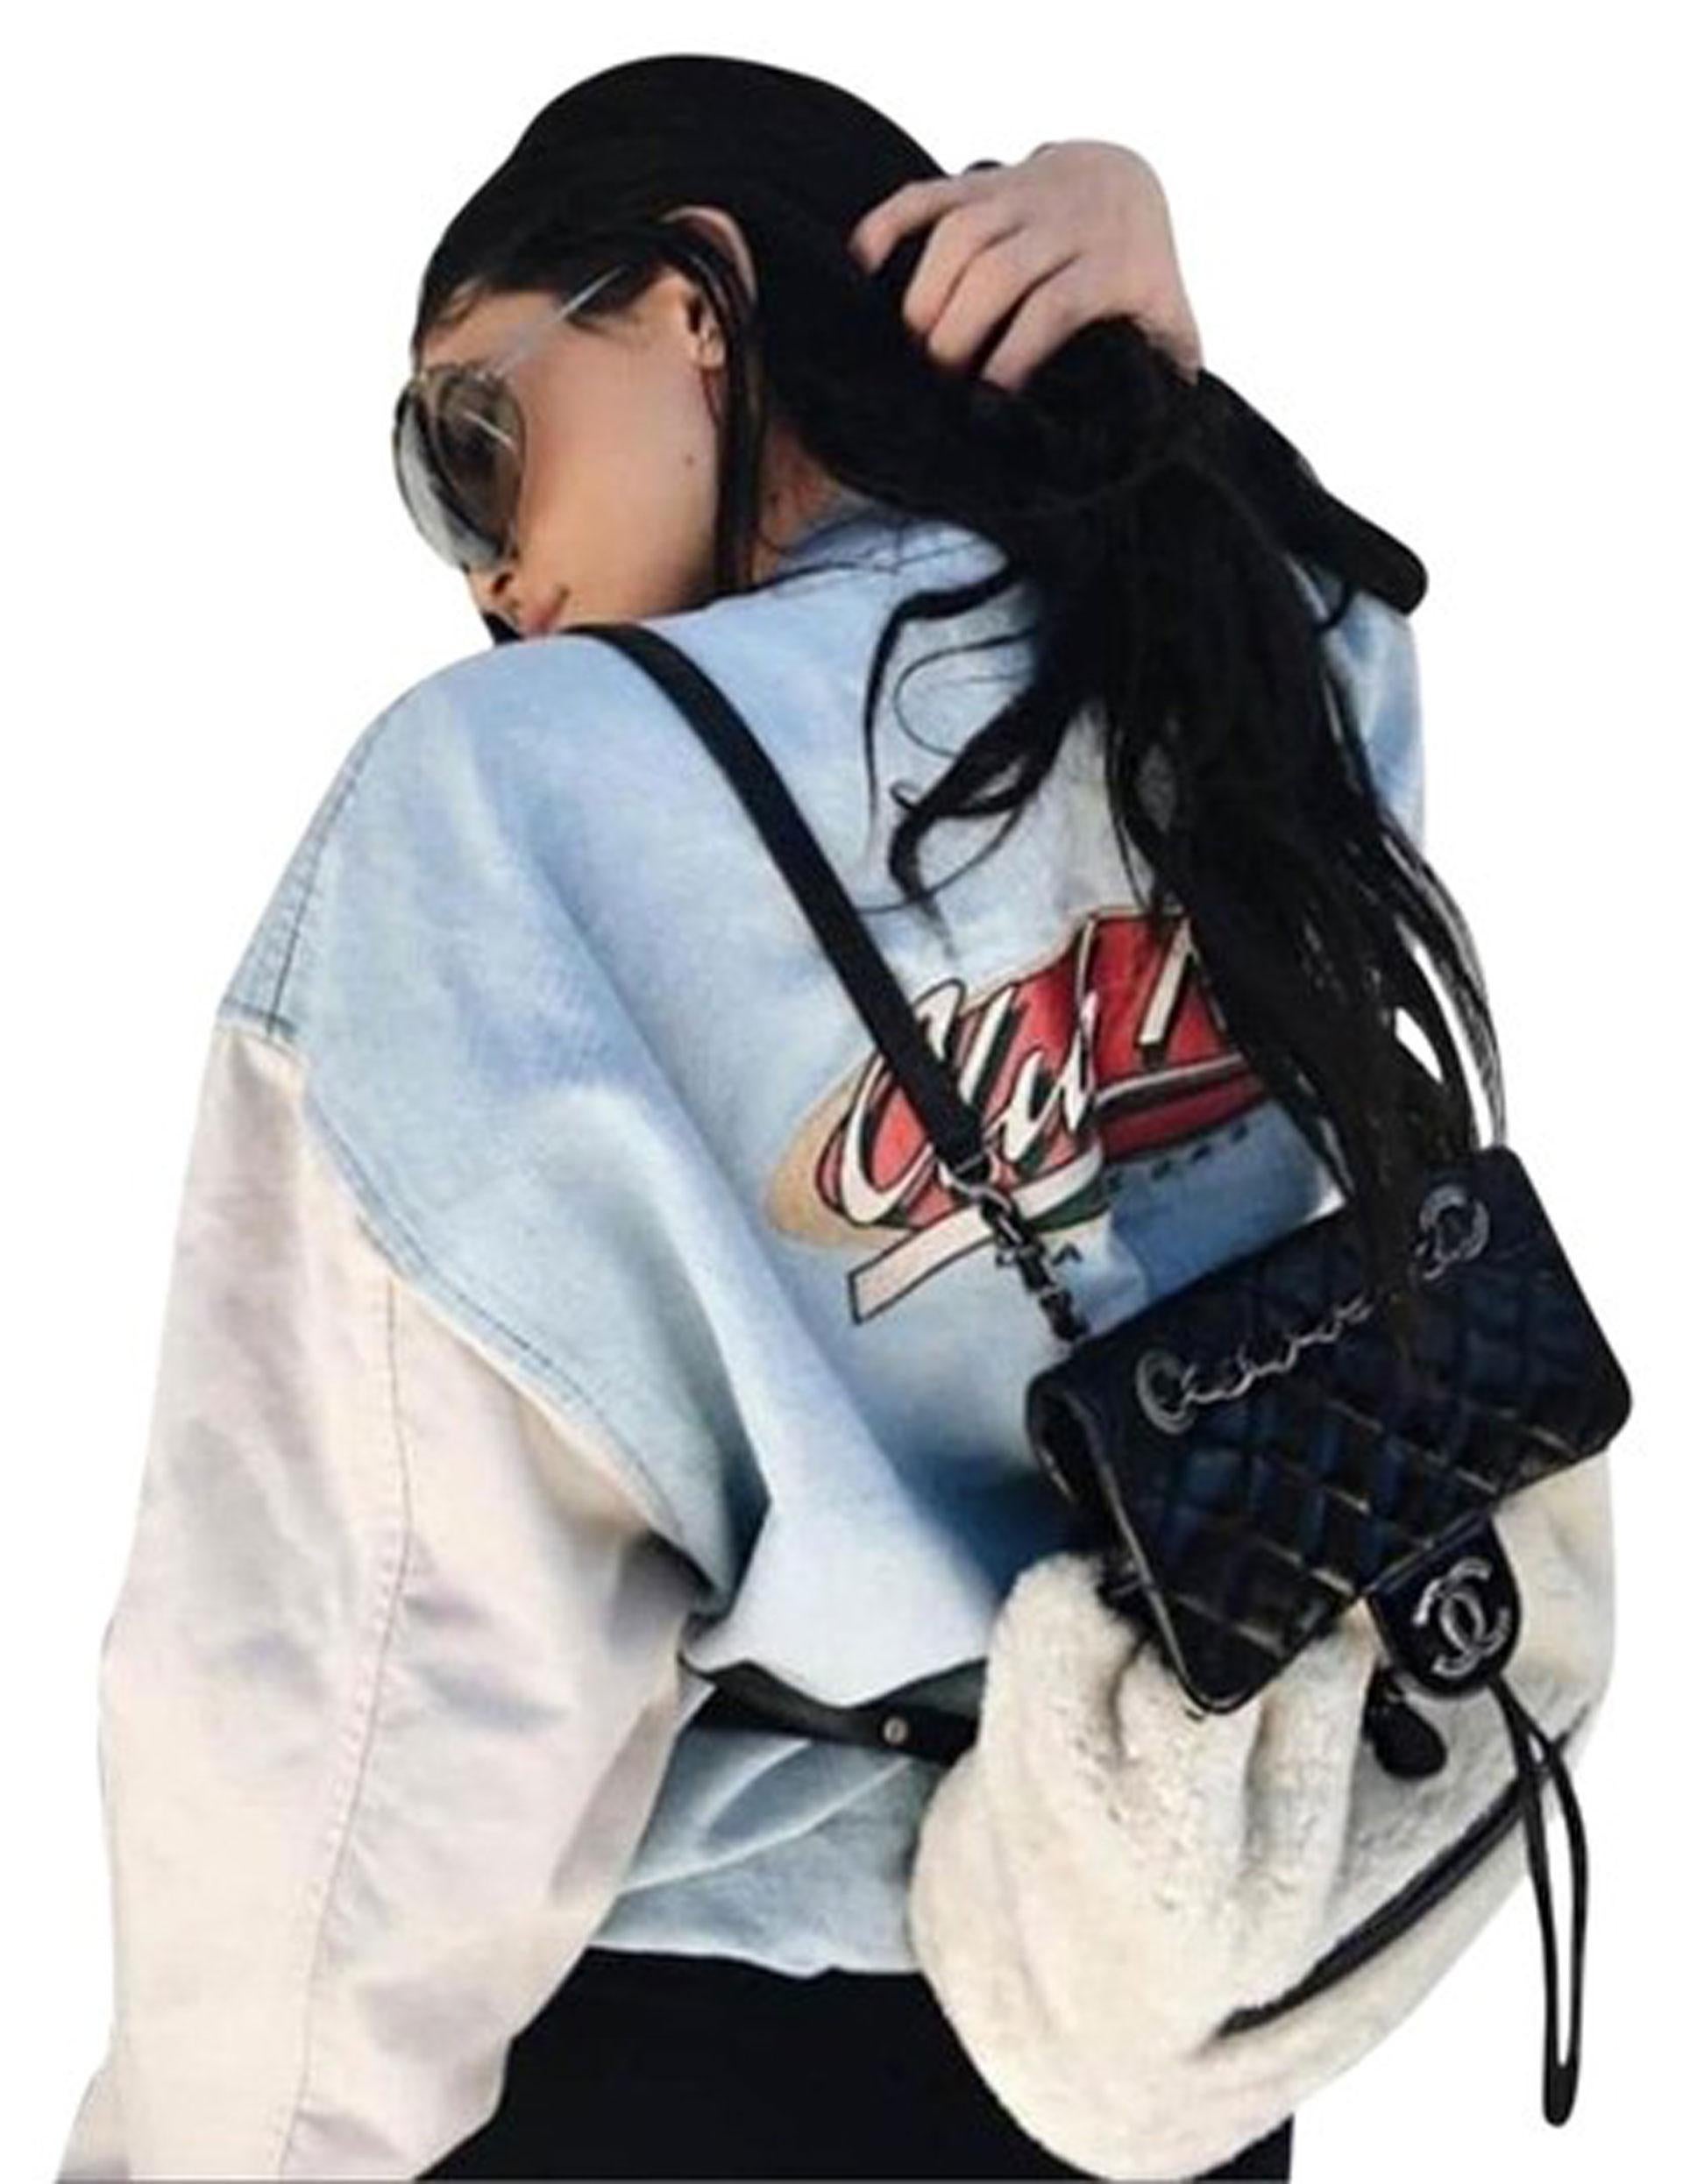 CHANEL Paris-Salzburg backpack in exact size and color as seen on Kylie Jenner. 

Features black calfskin and white (slightly beige) shearling. This model has been sold out and highly sought after. Perfect for upcoming winter season.
This Chanel